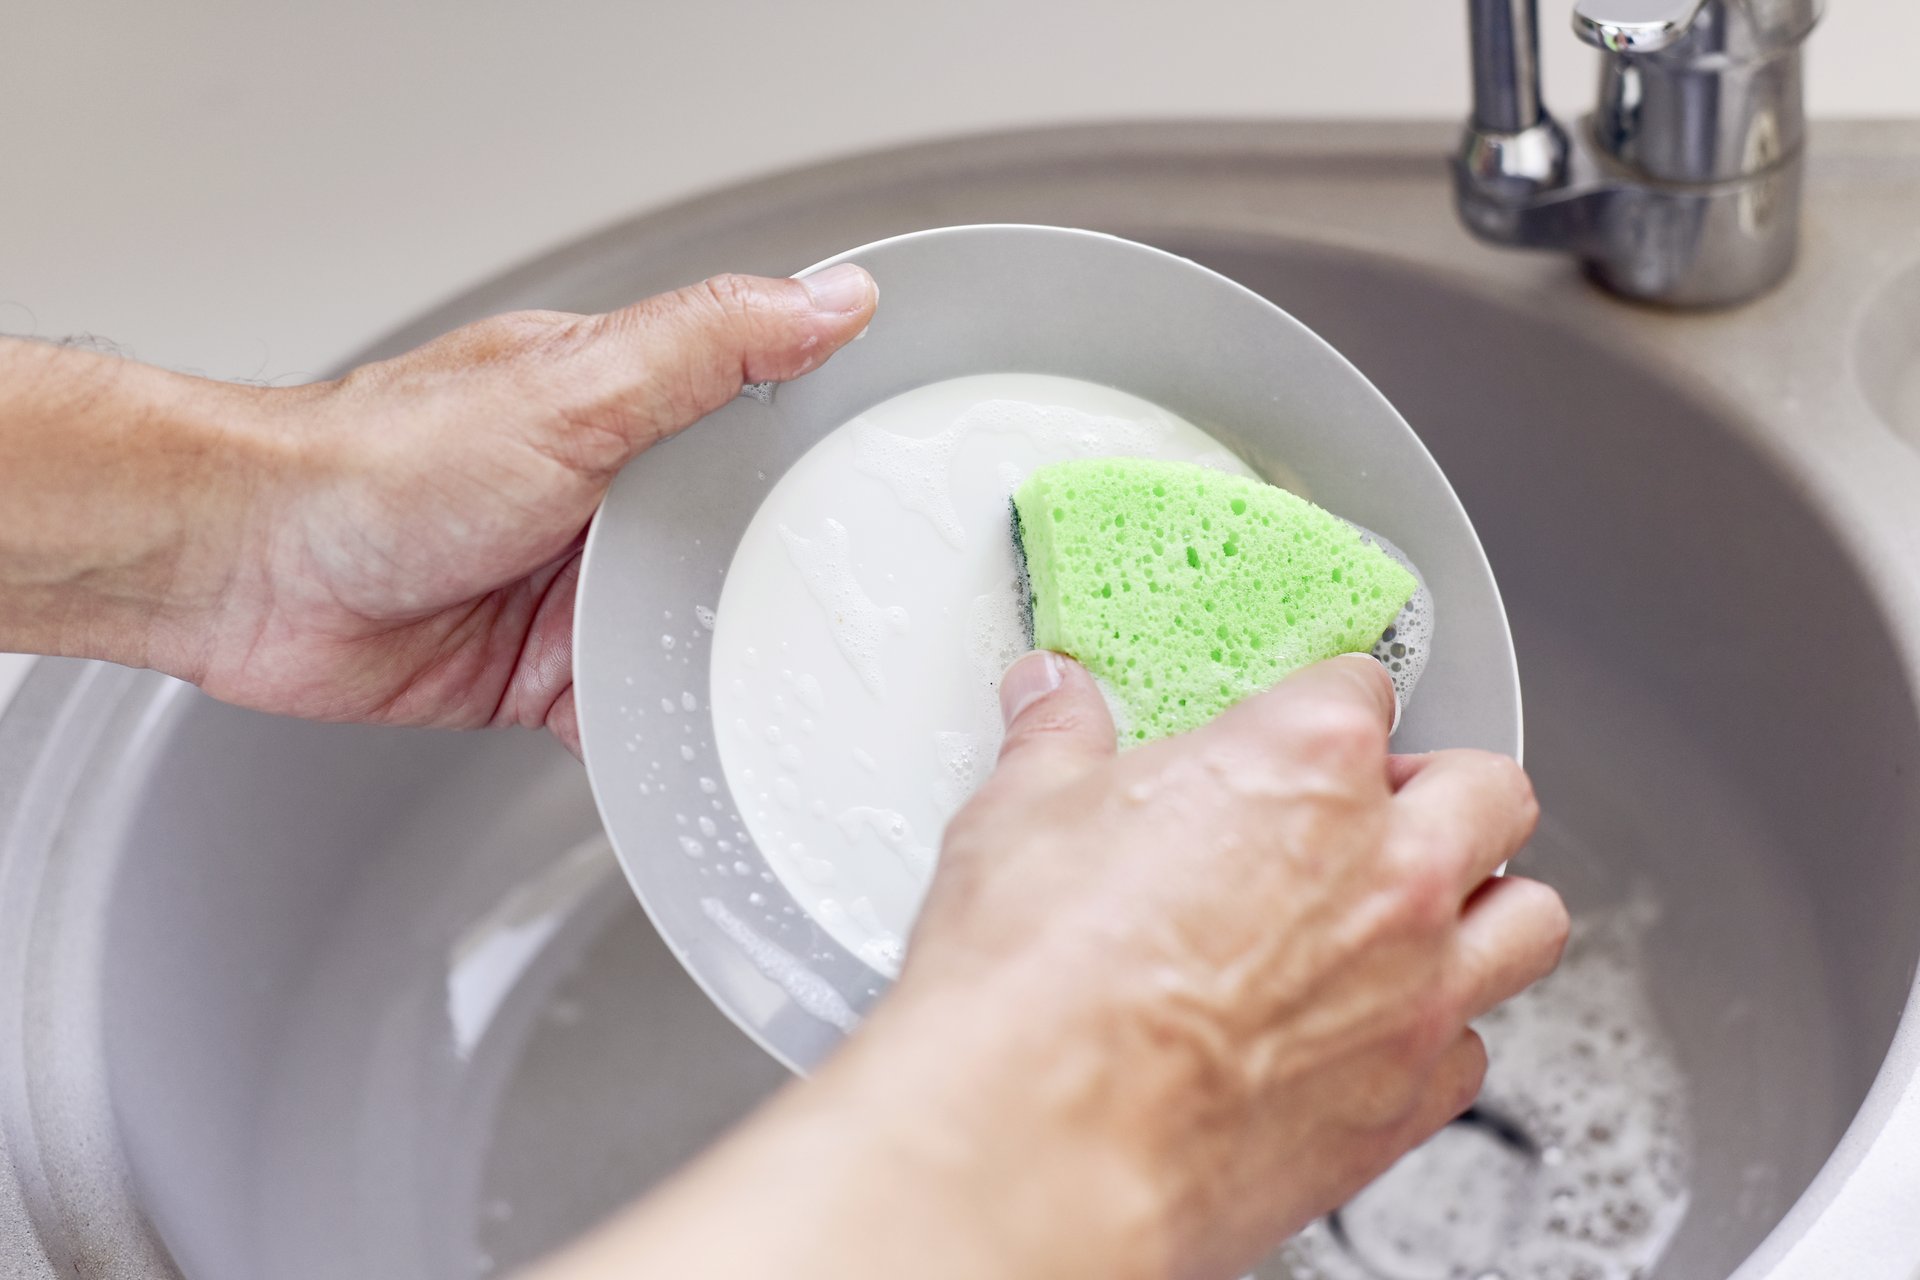 How Worried Should I Be About Bacteria on Kitchen Sponges